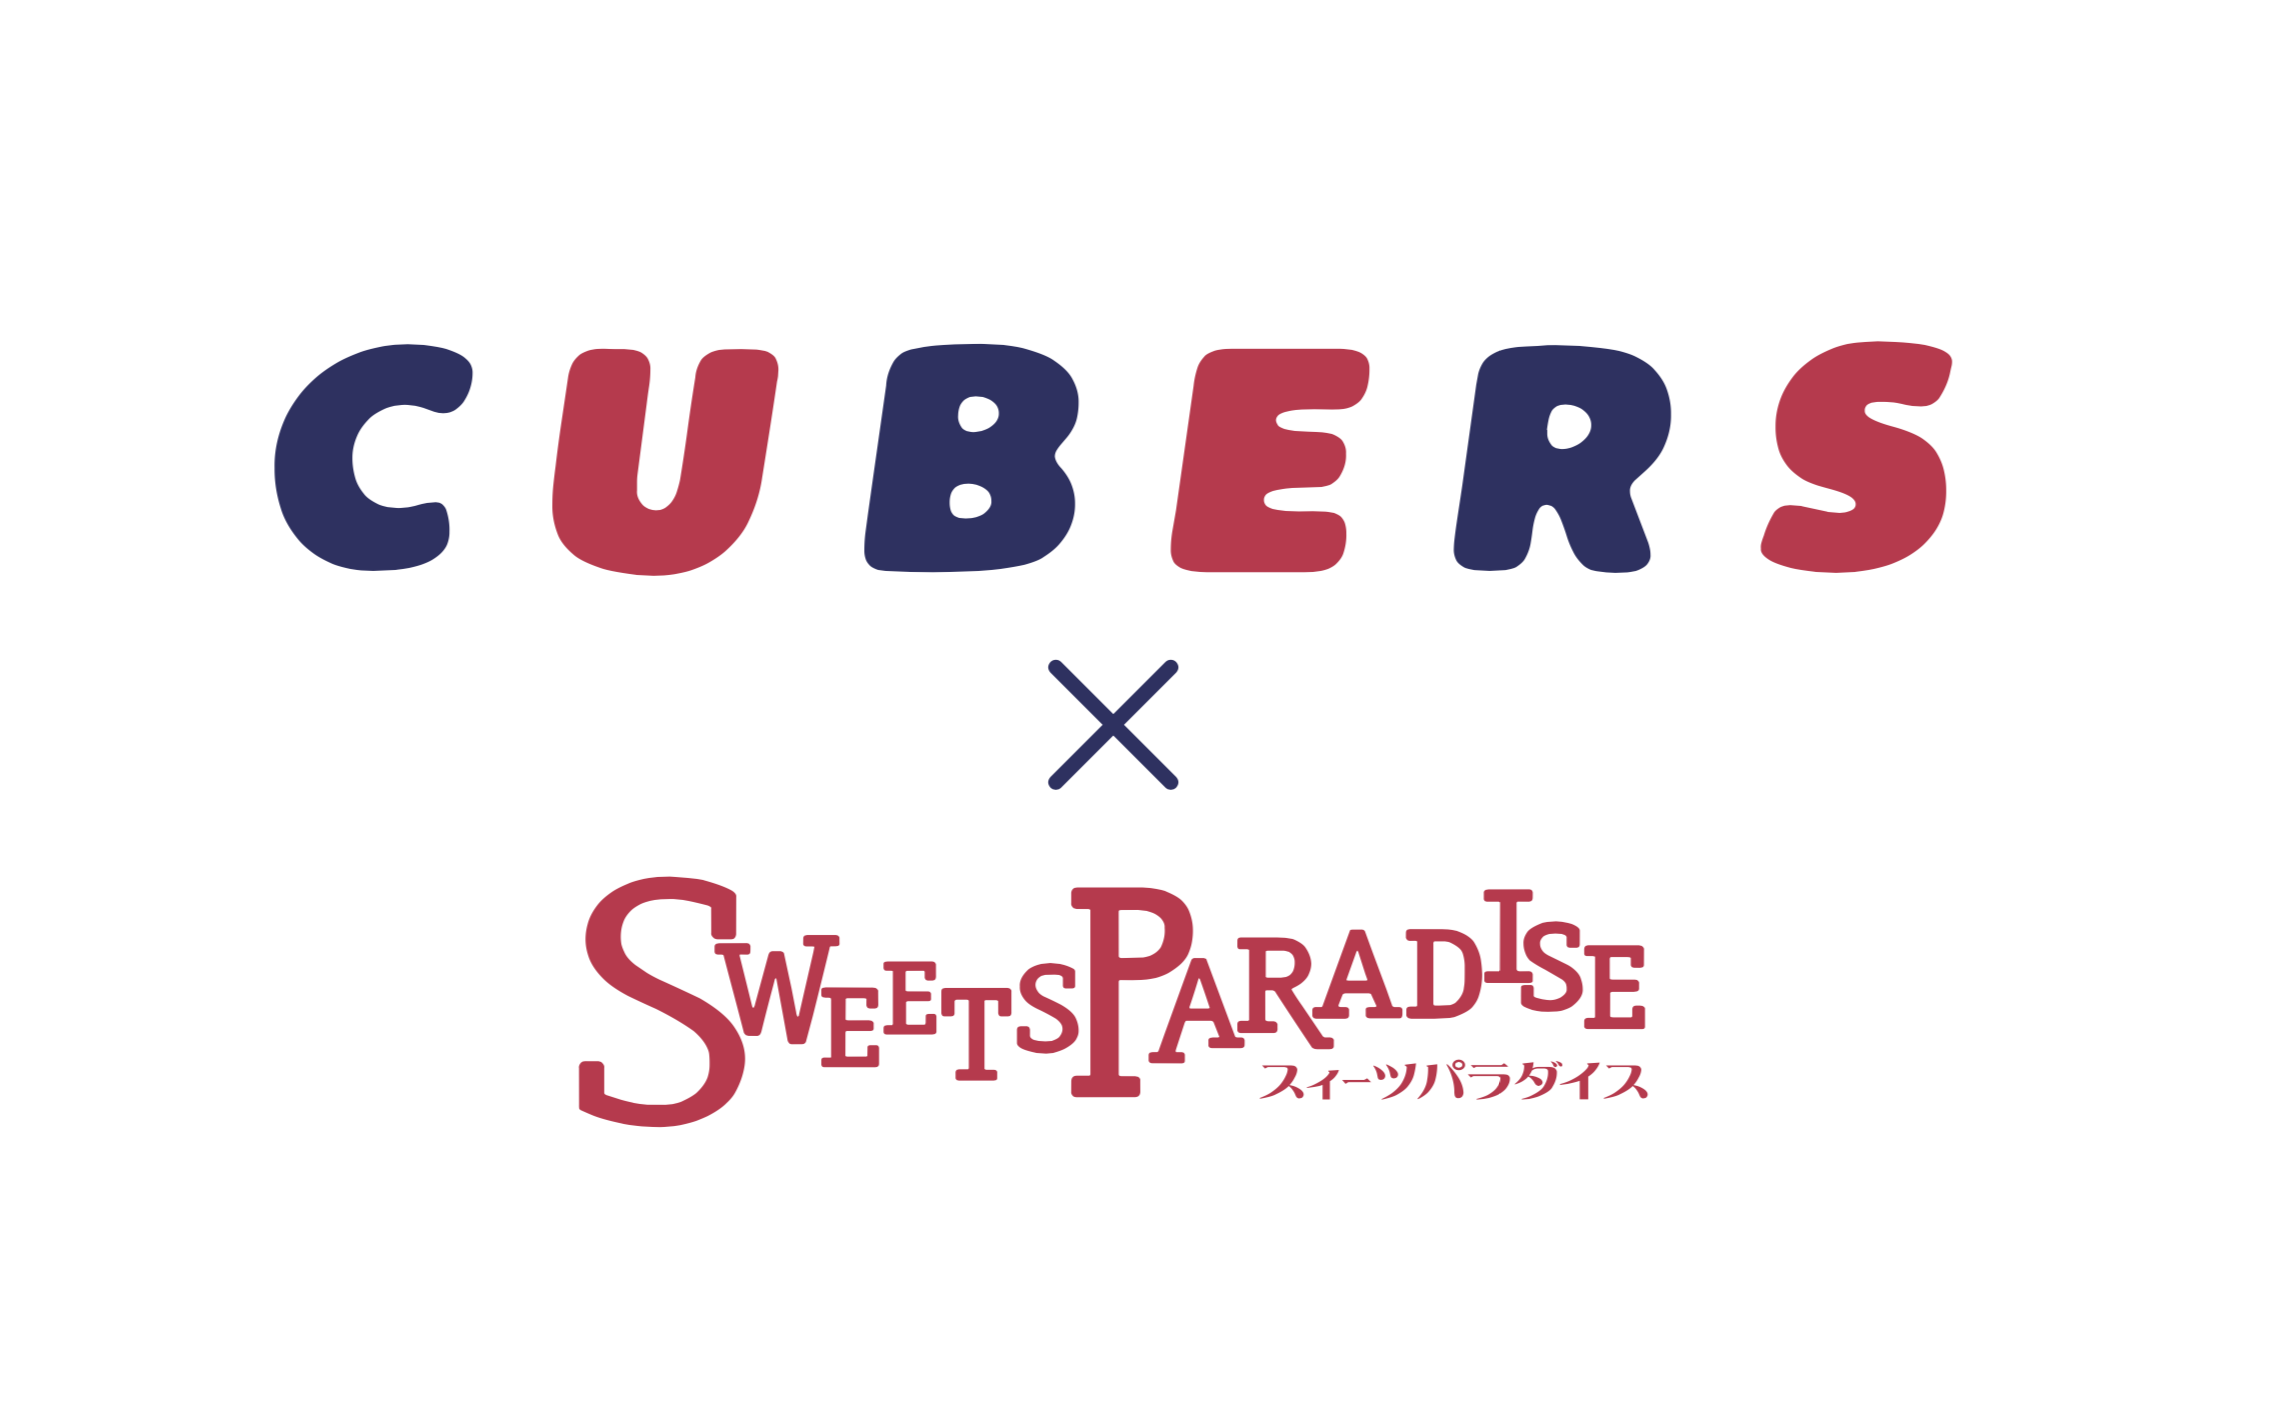 ★☆”CUBERS × SWEETS PARADISE”コラボカフェの開催が決定！★☆